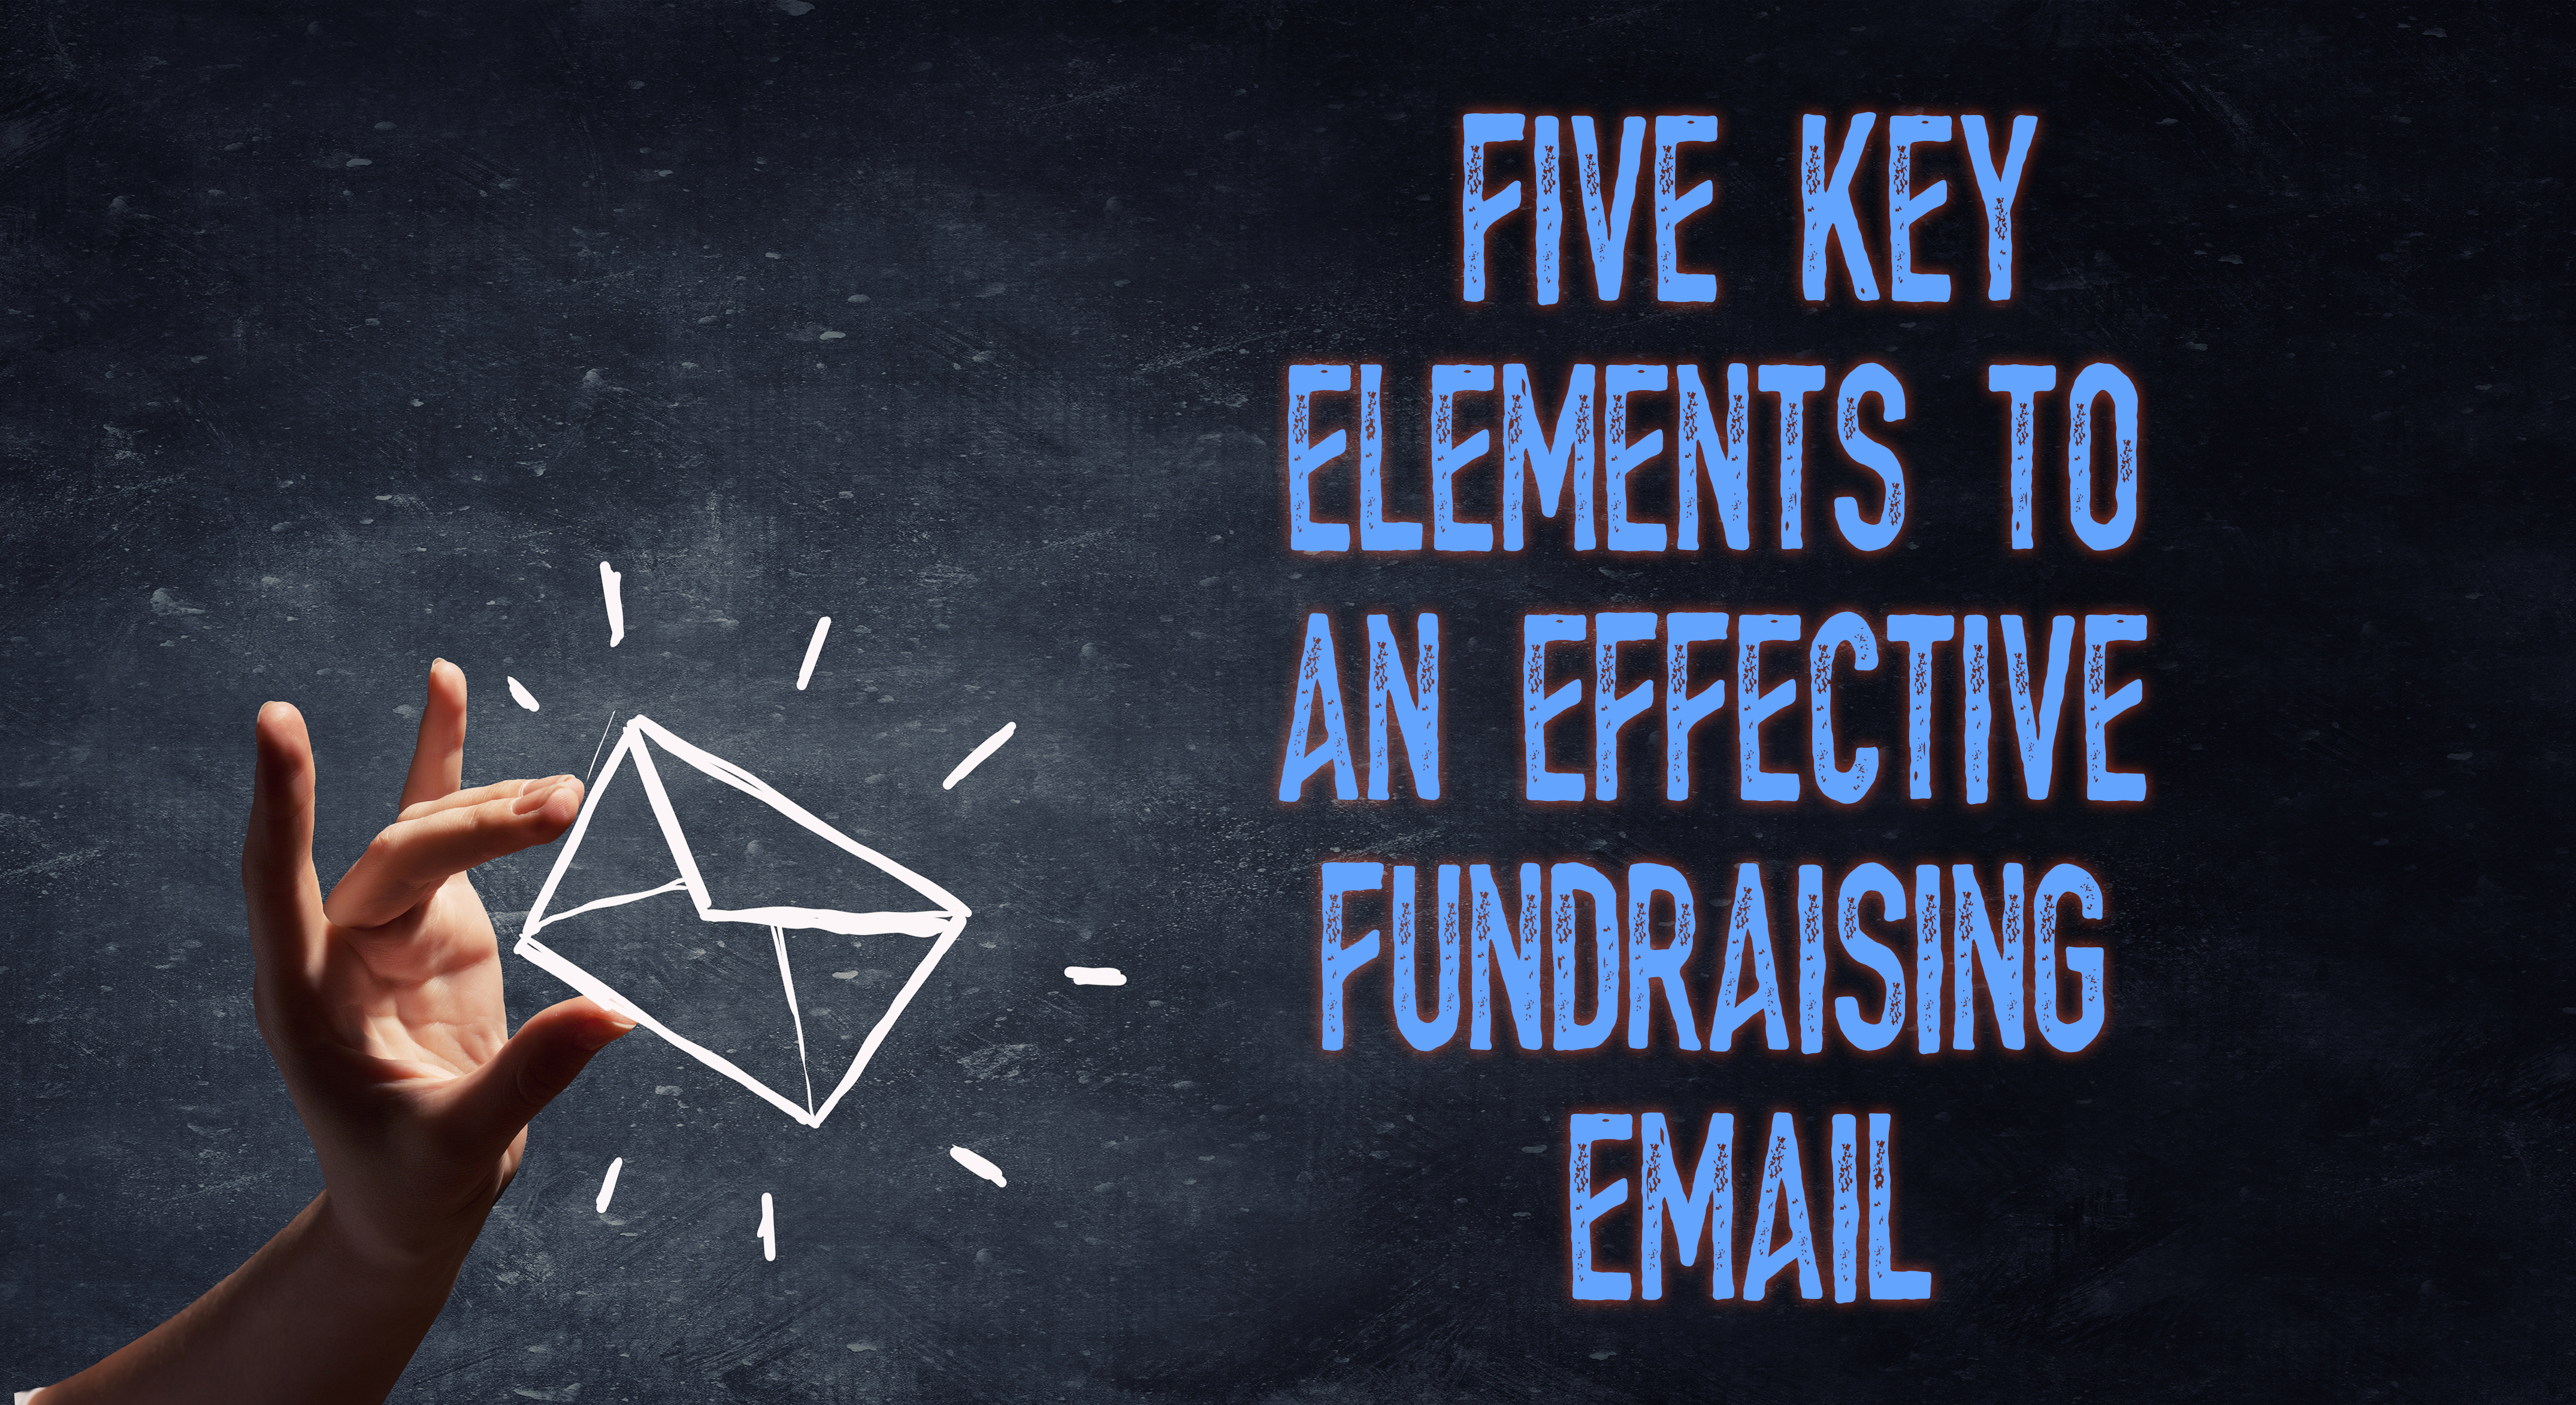 The Five Key Elements of an Effective Fundraising Email